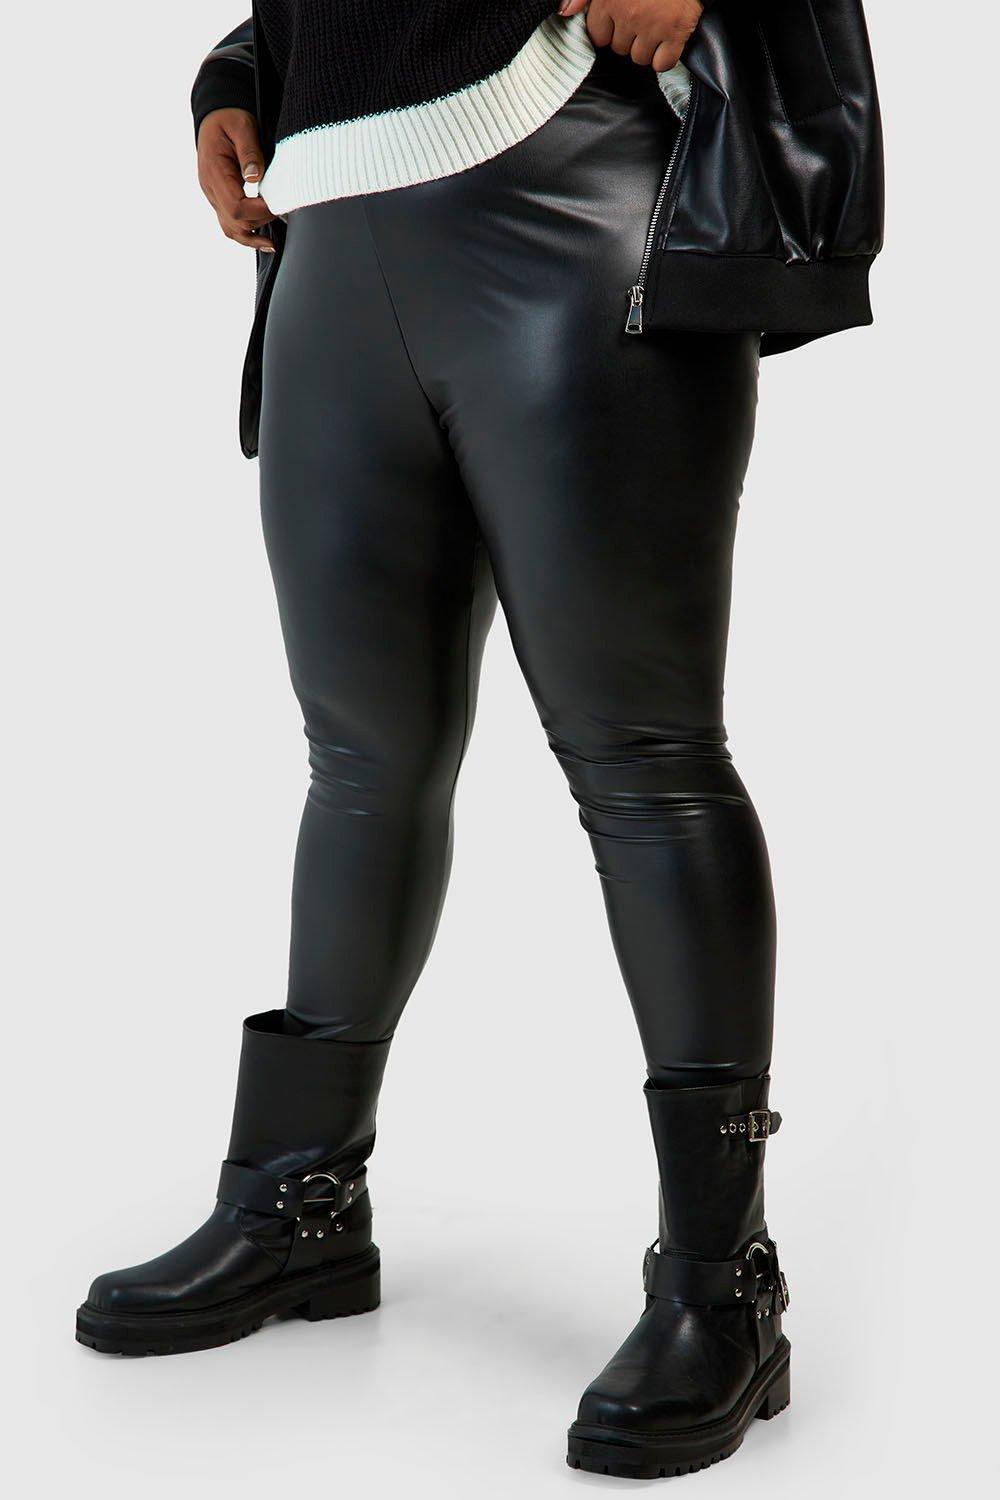 Plus Super Stretch Waist Shaping Faux Leather Legging